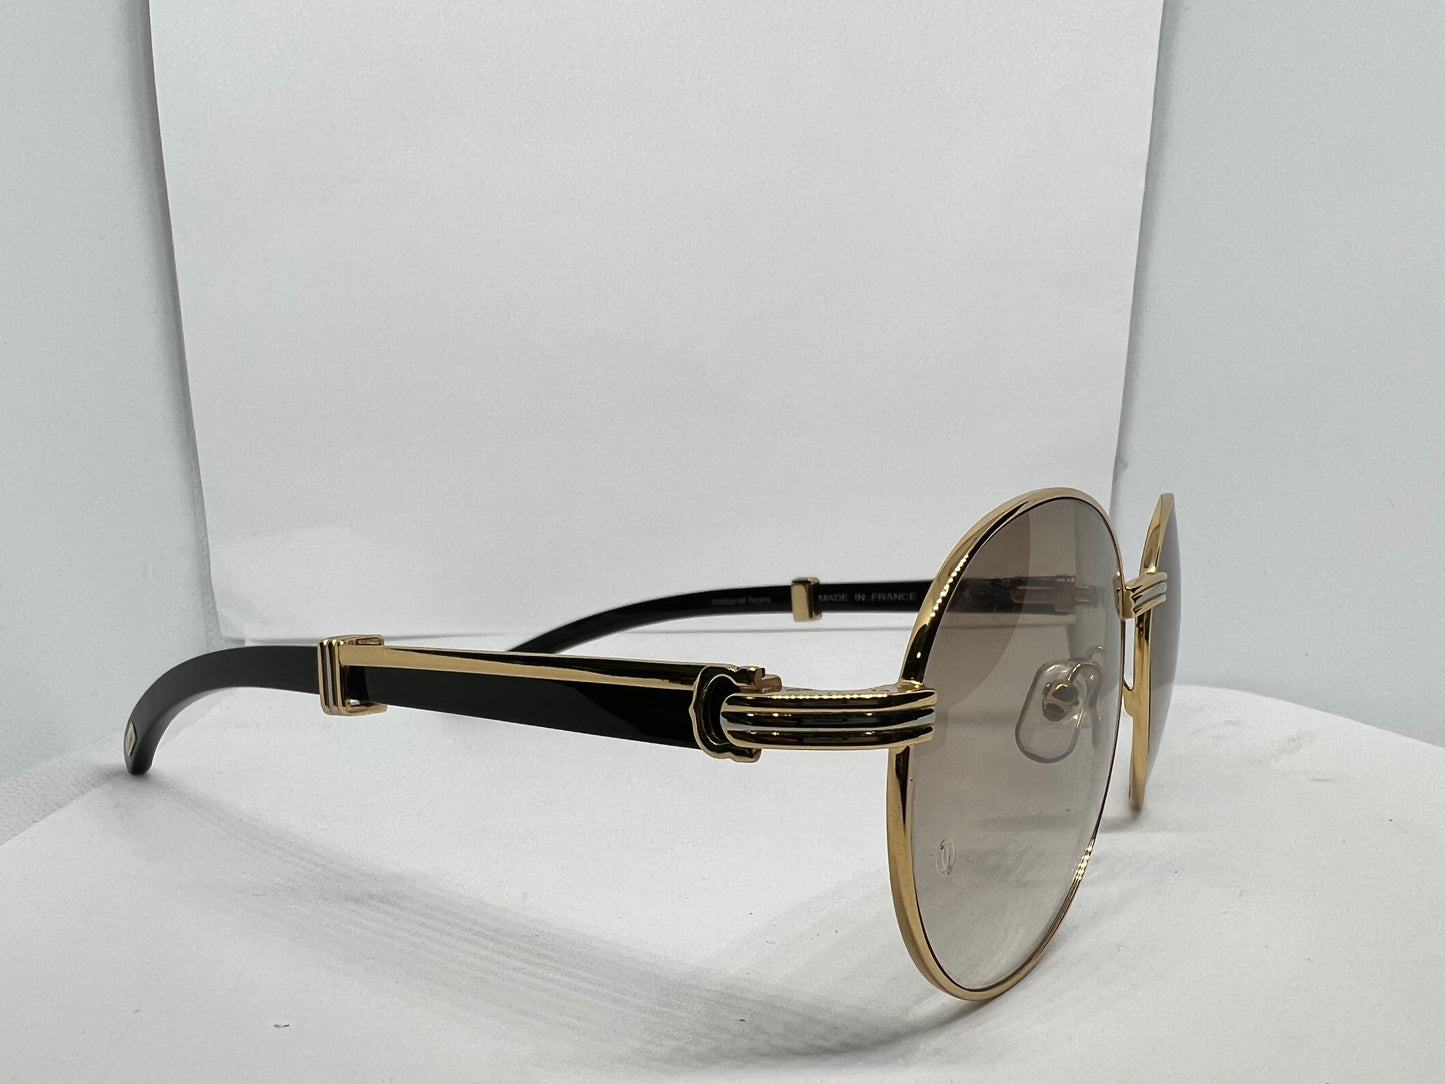 Cartier Black Horn Arms w/ Gold Oval Tinted Lenses